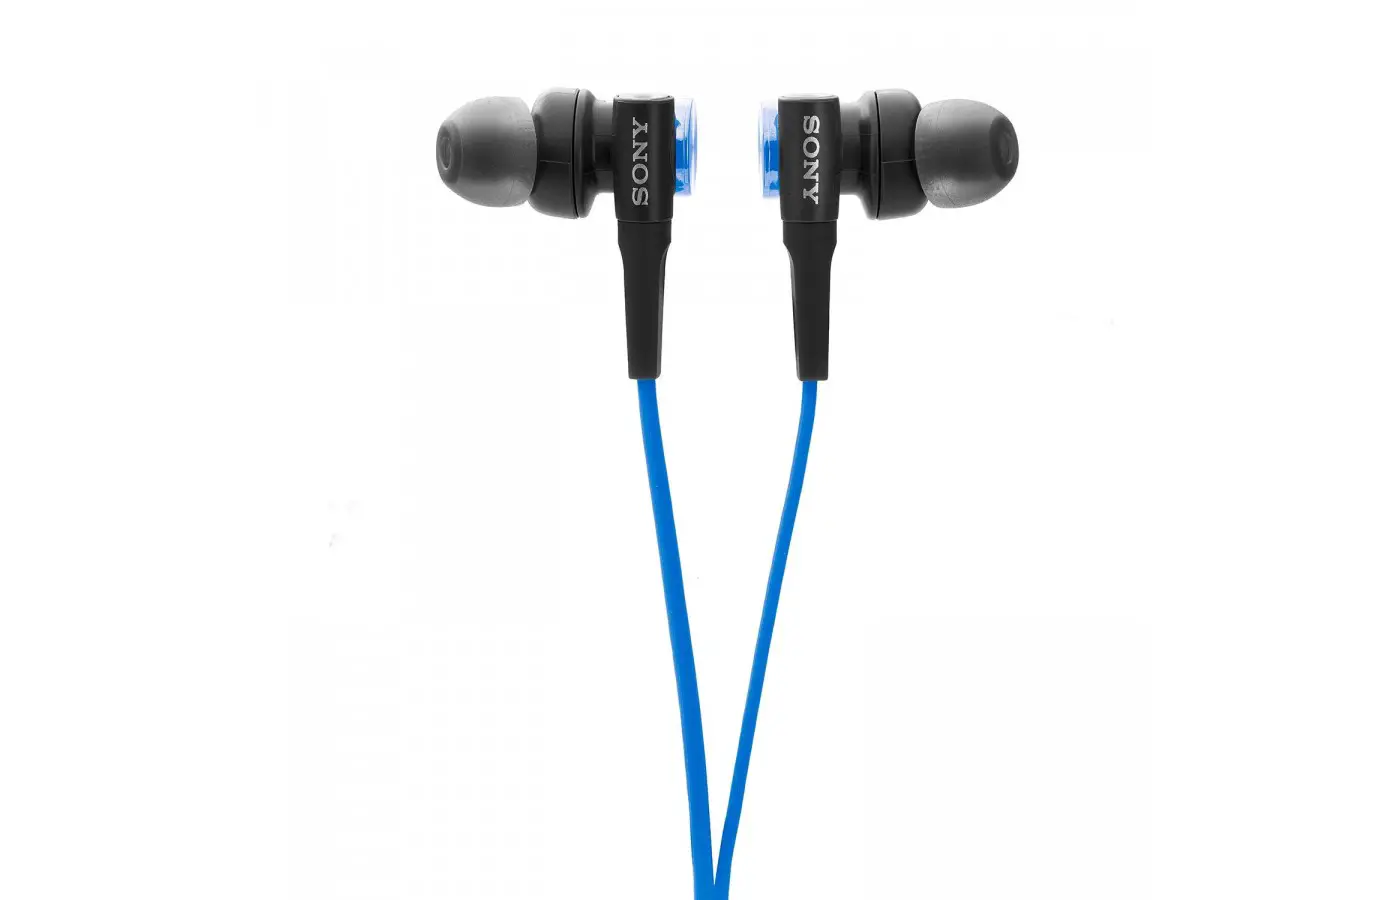 The Sony MDRXB50AP also offers a lightweight design for less strain and easier transport.